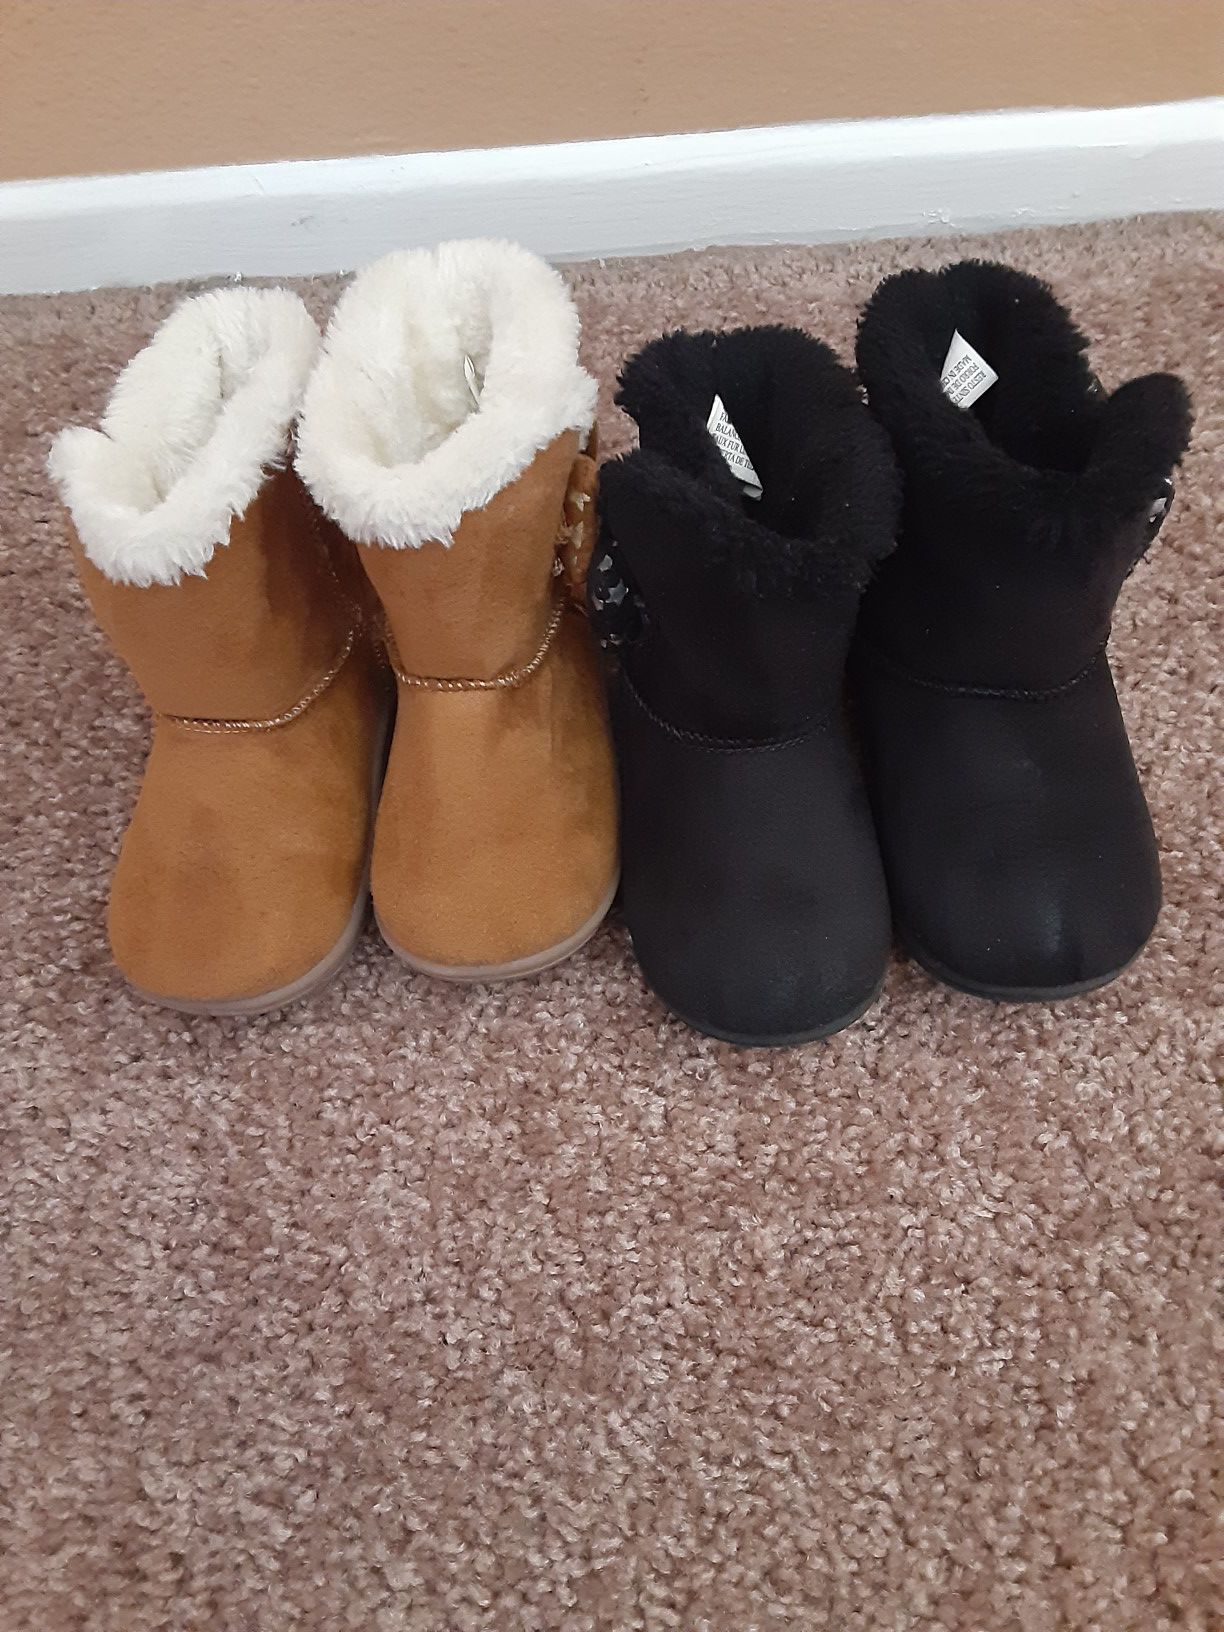 Used Garanimals Toddlers girl boots Zise #5 2×$20 O Best offer